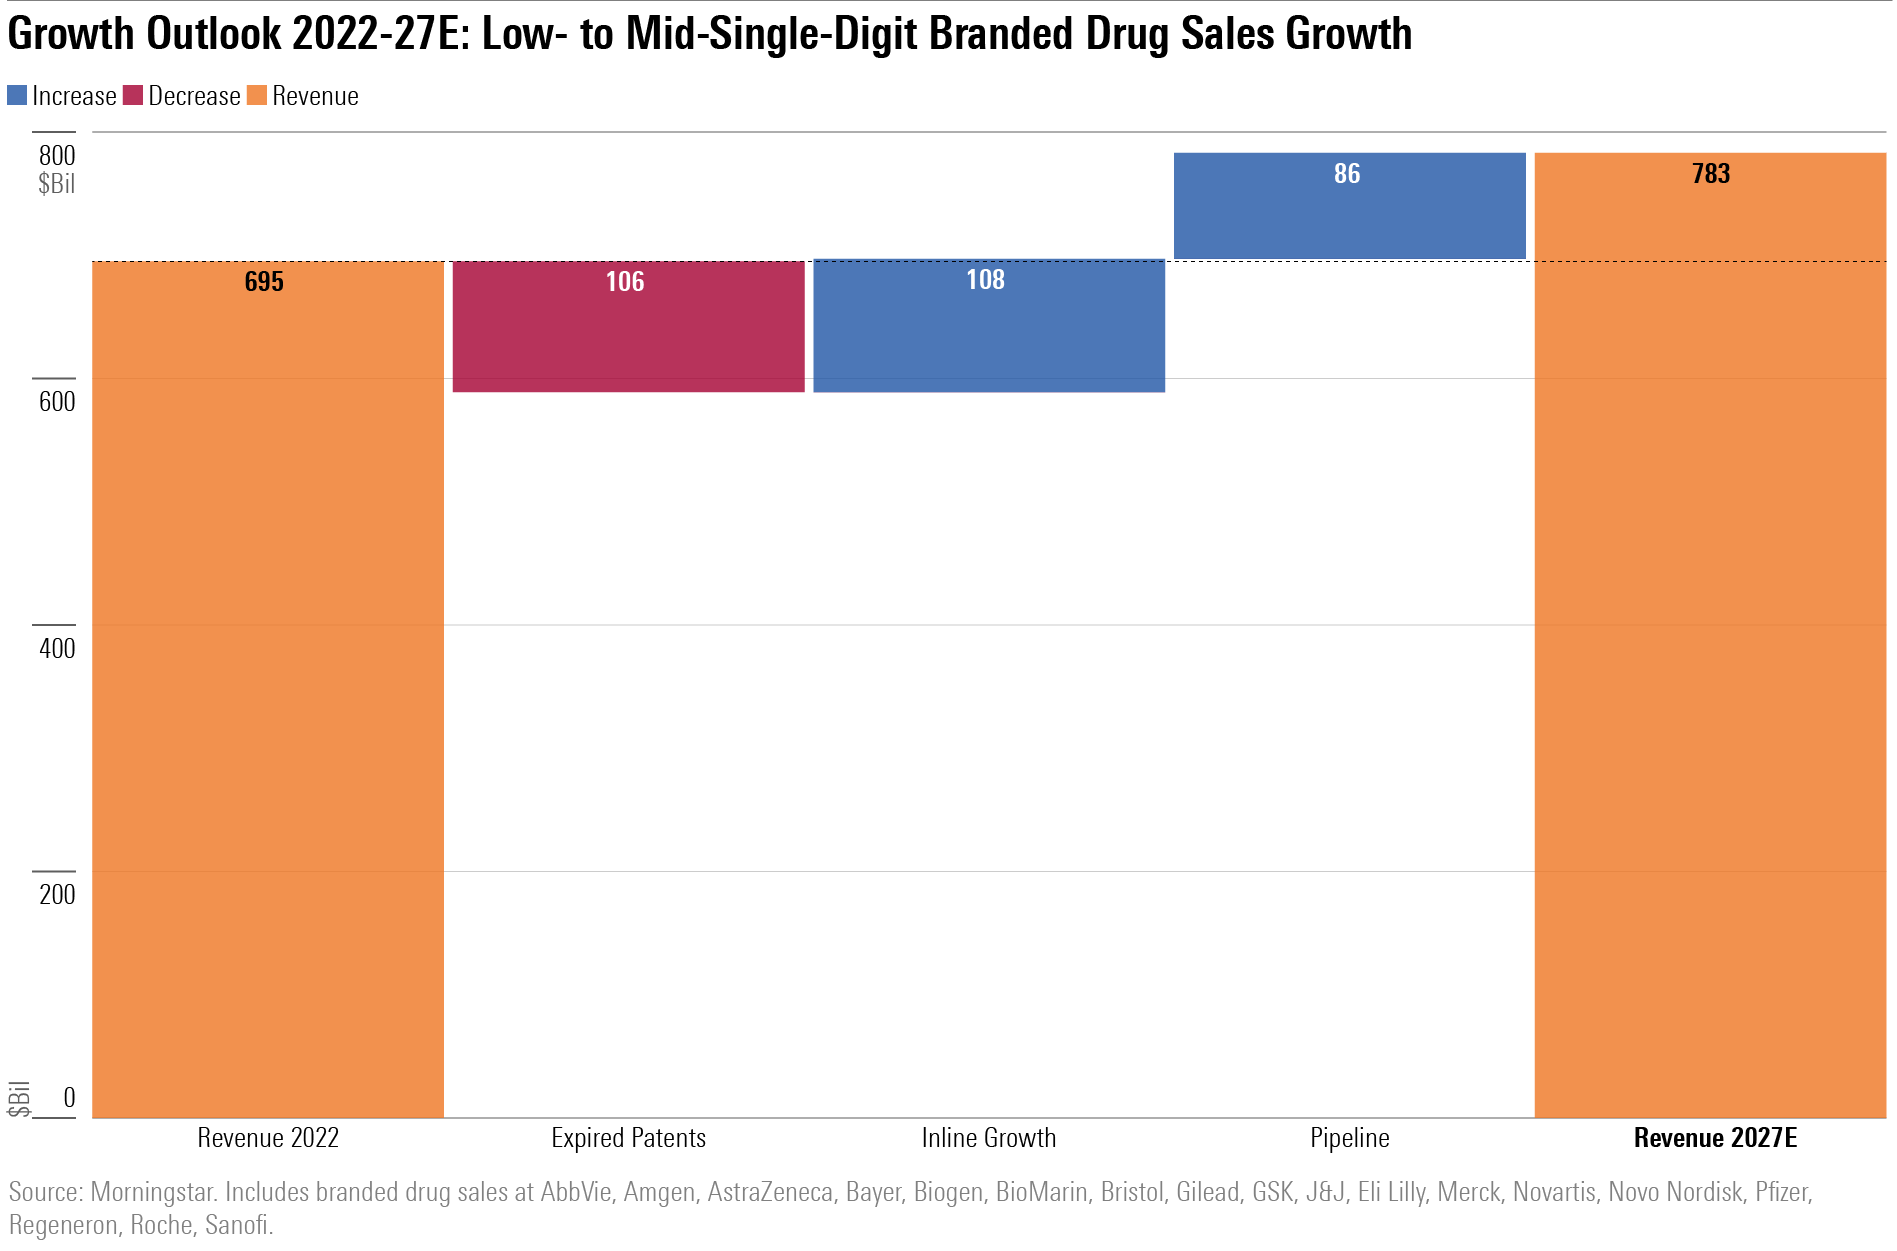 Bar chart showing our forecast for branded drug sales at top biopharma firms through 2027, excluding Pfizer's COVID vaccine and Paxlovid sales.